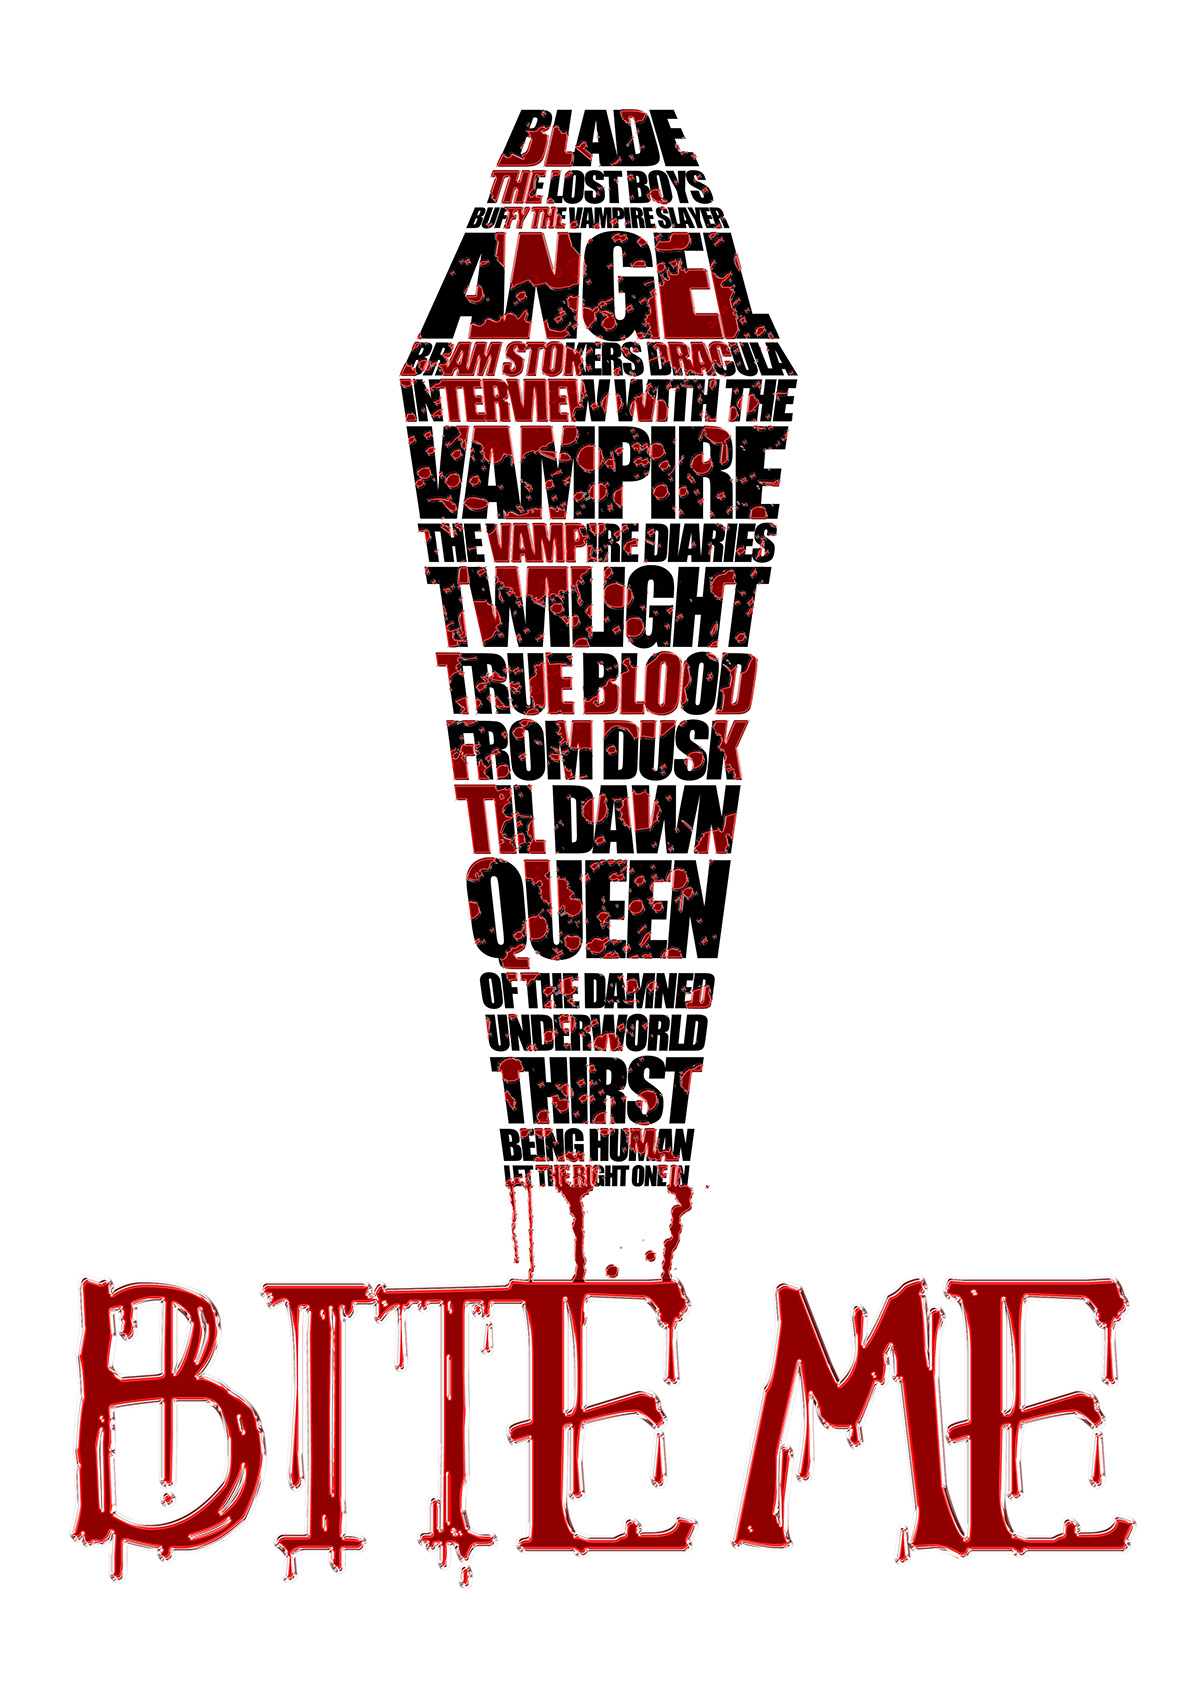 poster true blood Vampires celebrity juice Stephanie Plum Quotes butterfly